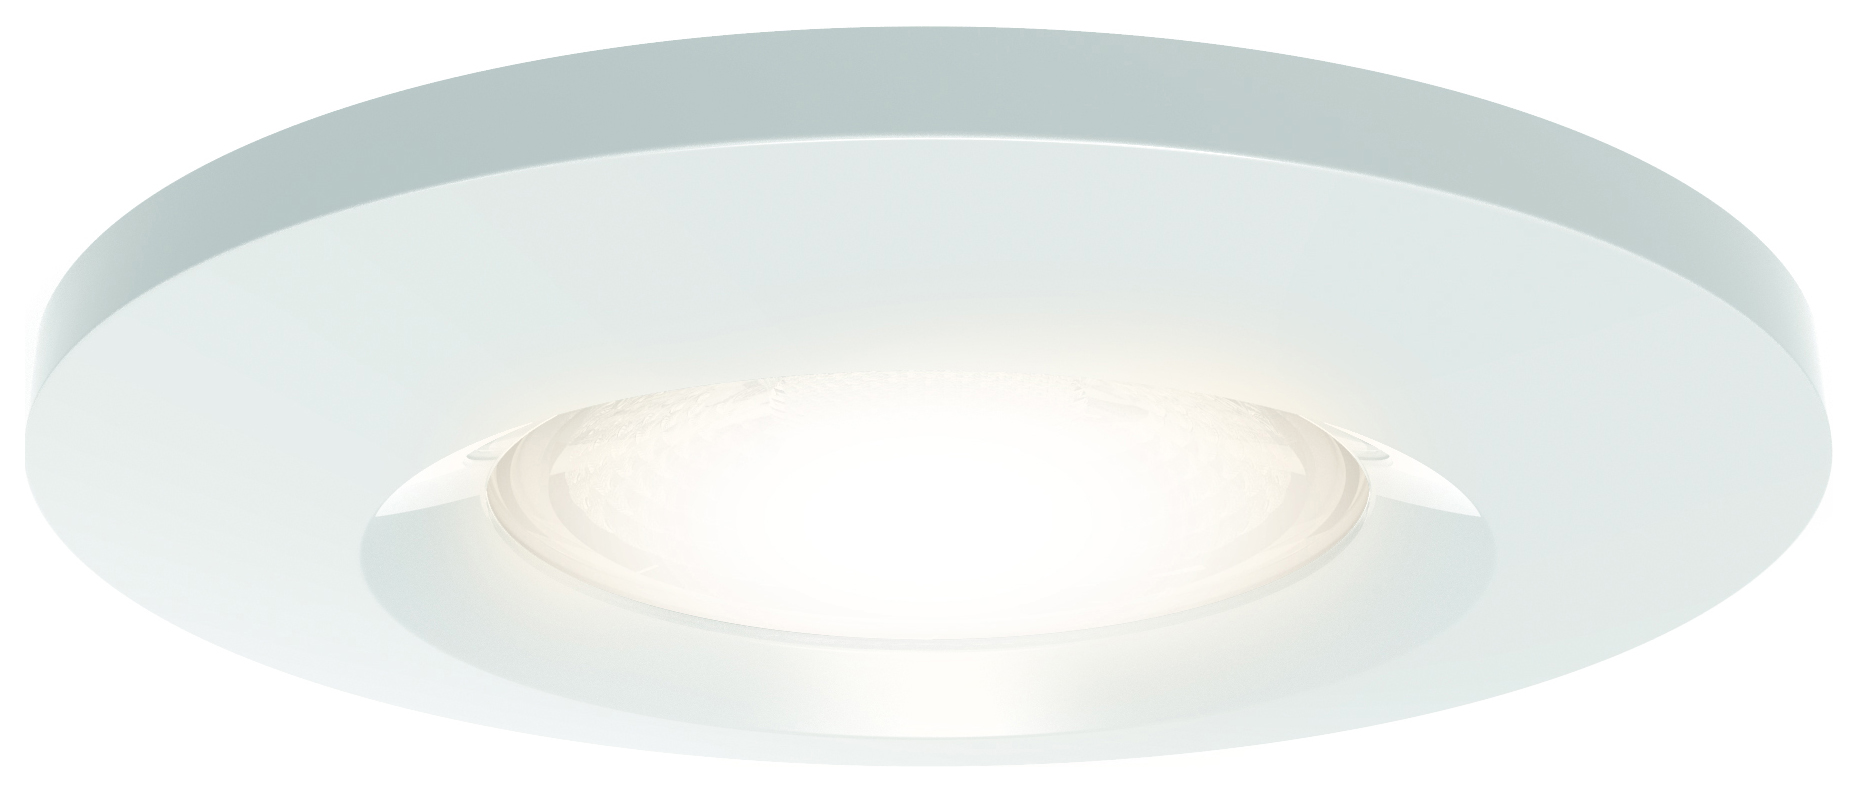 4Lite WiZ Connected IP65 Fire Rated LED Smart Downlight - 8W